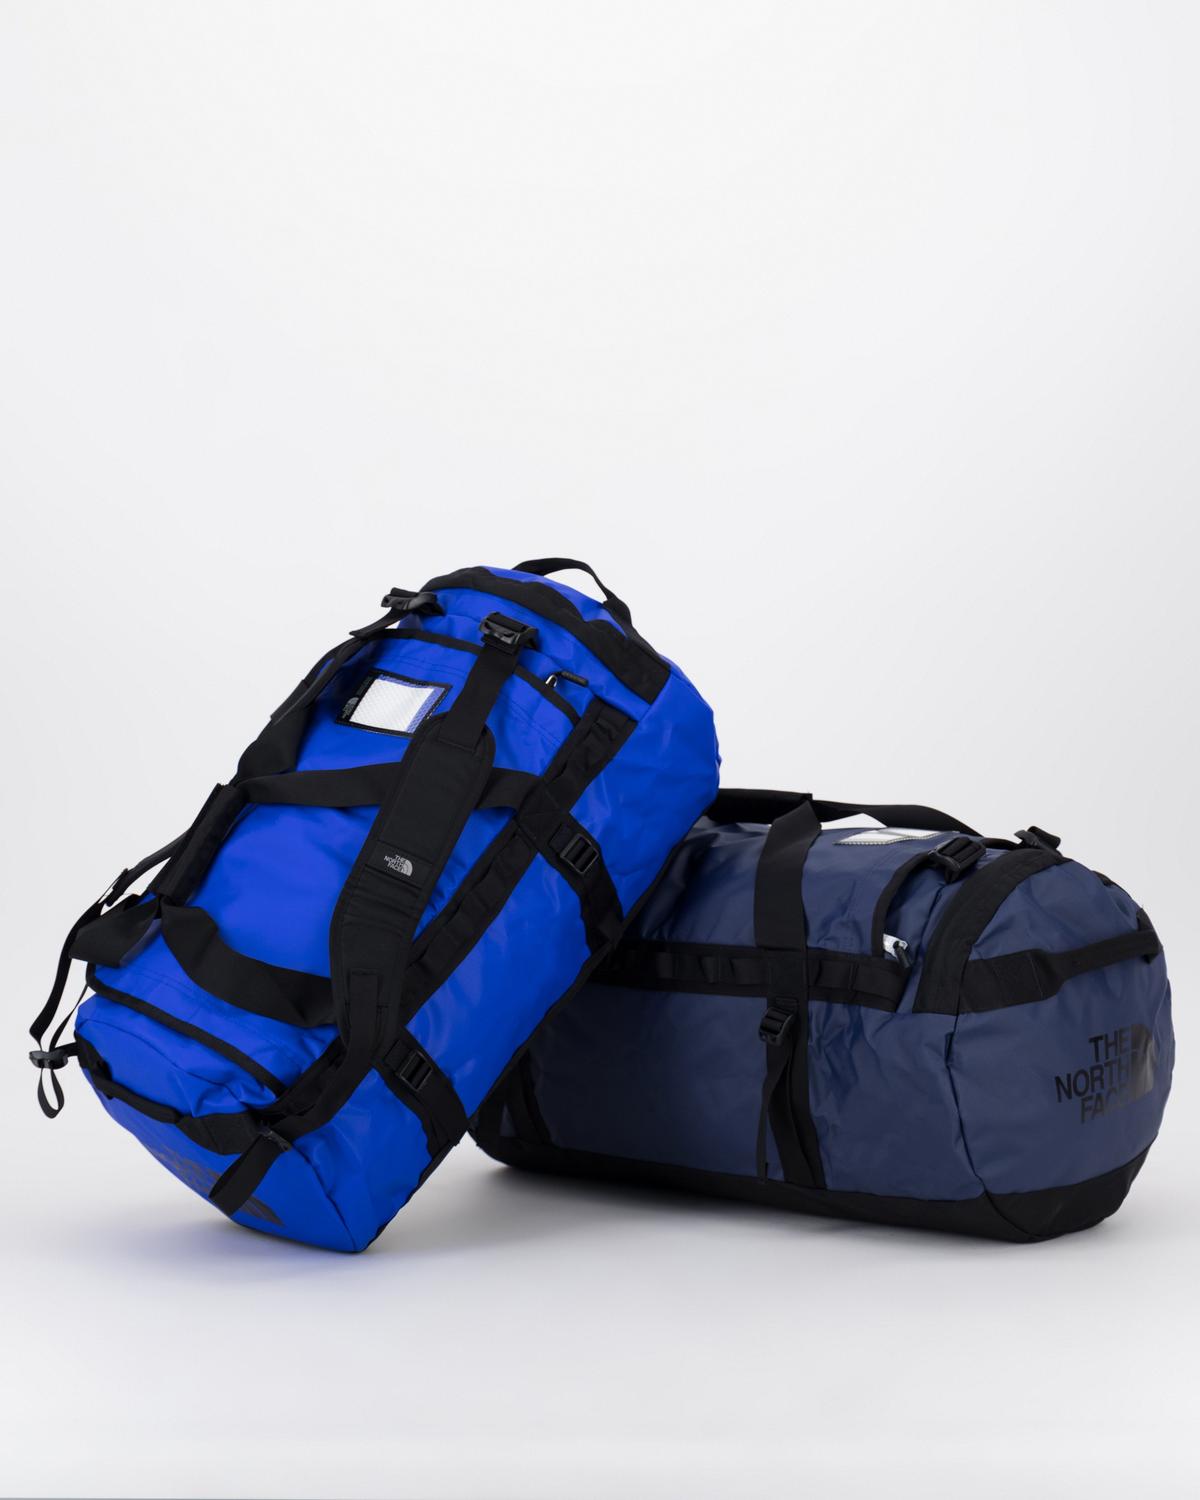 The North Face Large Base Camp Duffel Bag -  Blue